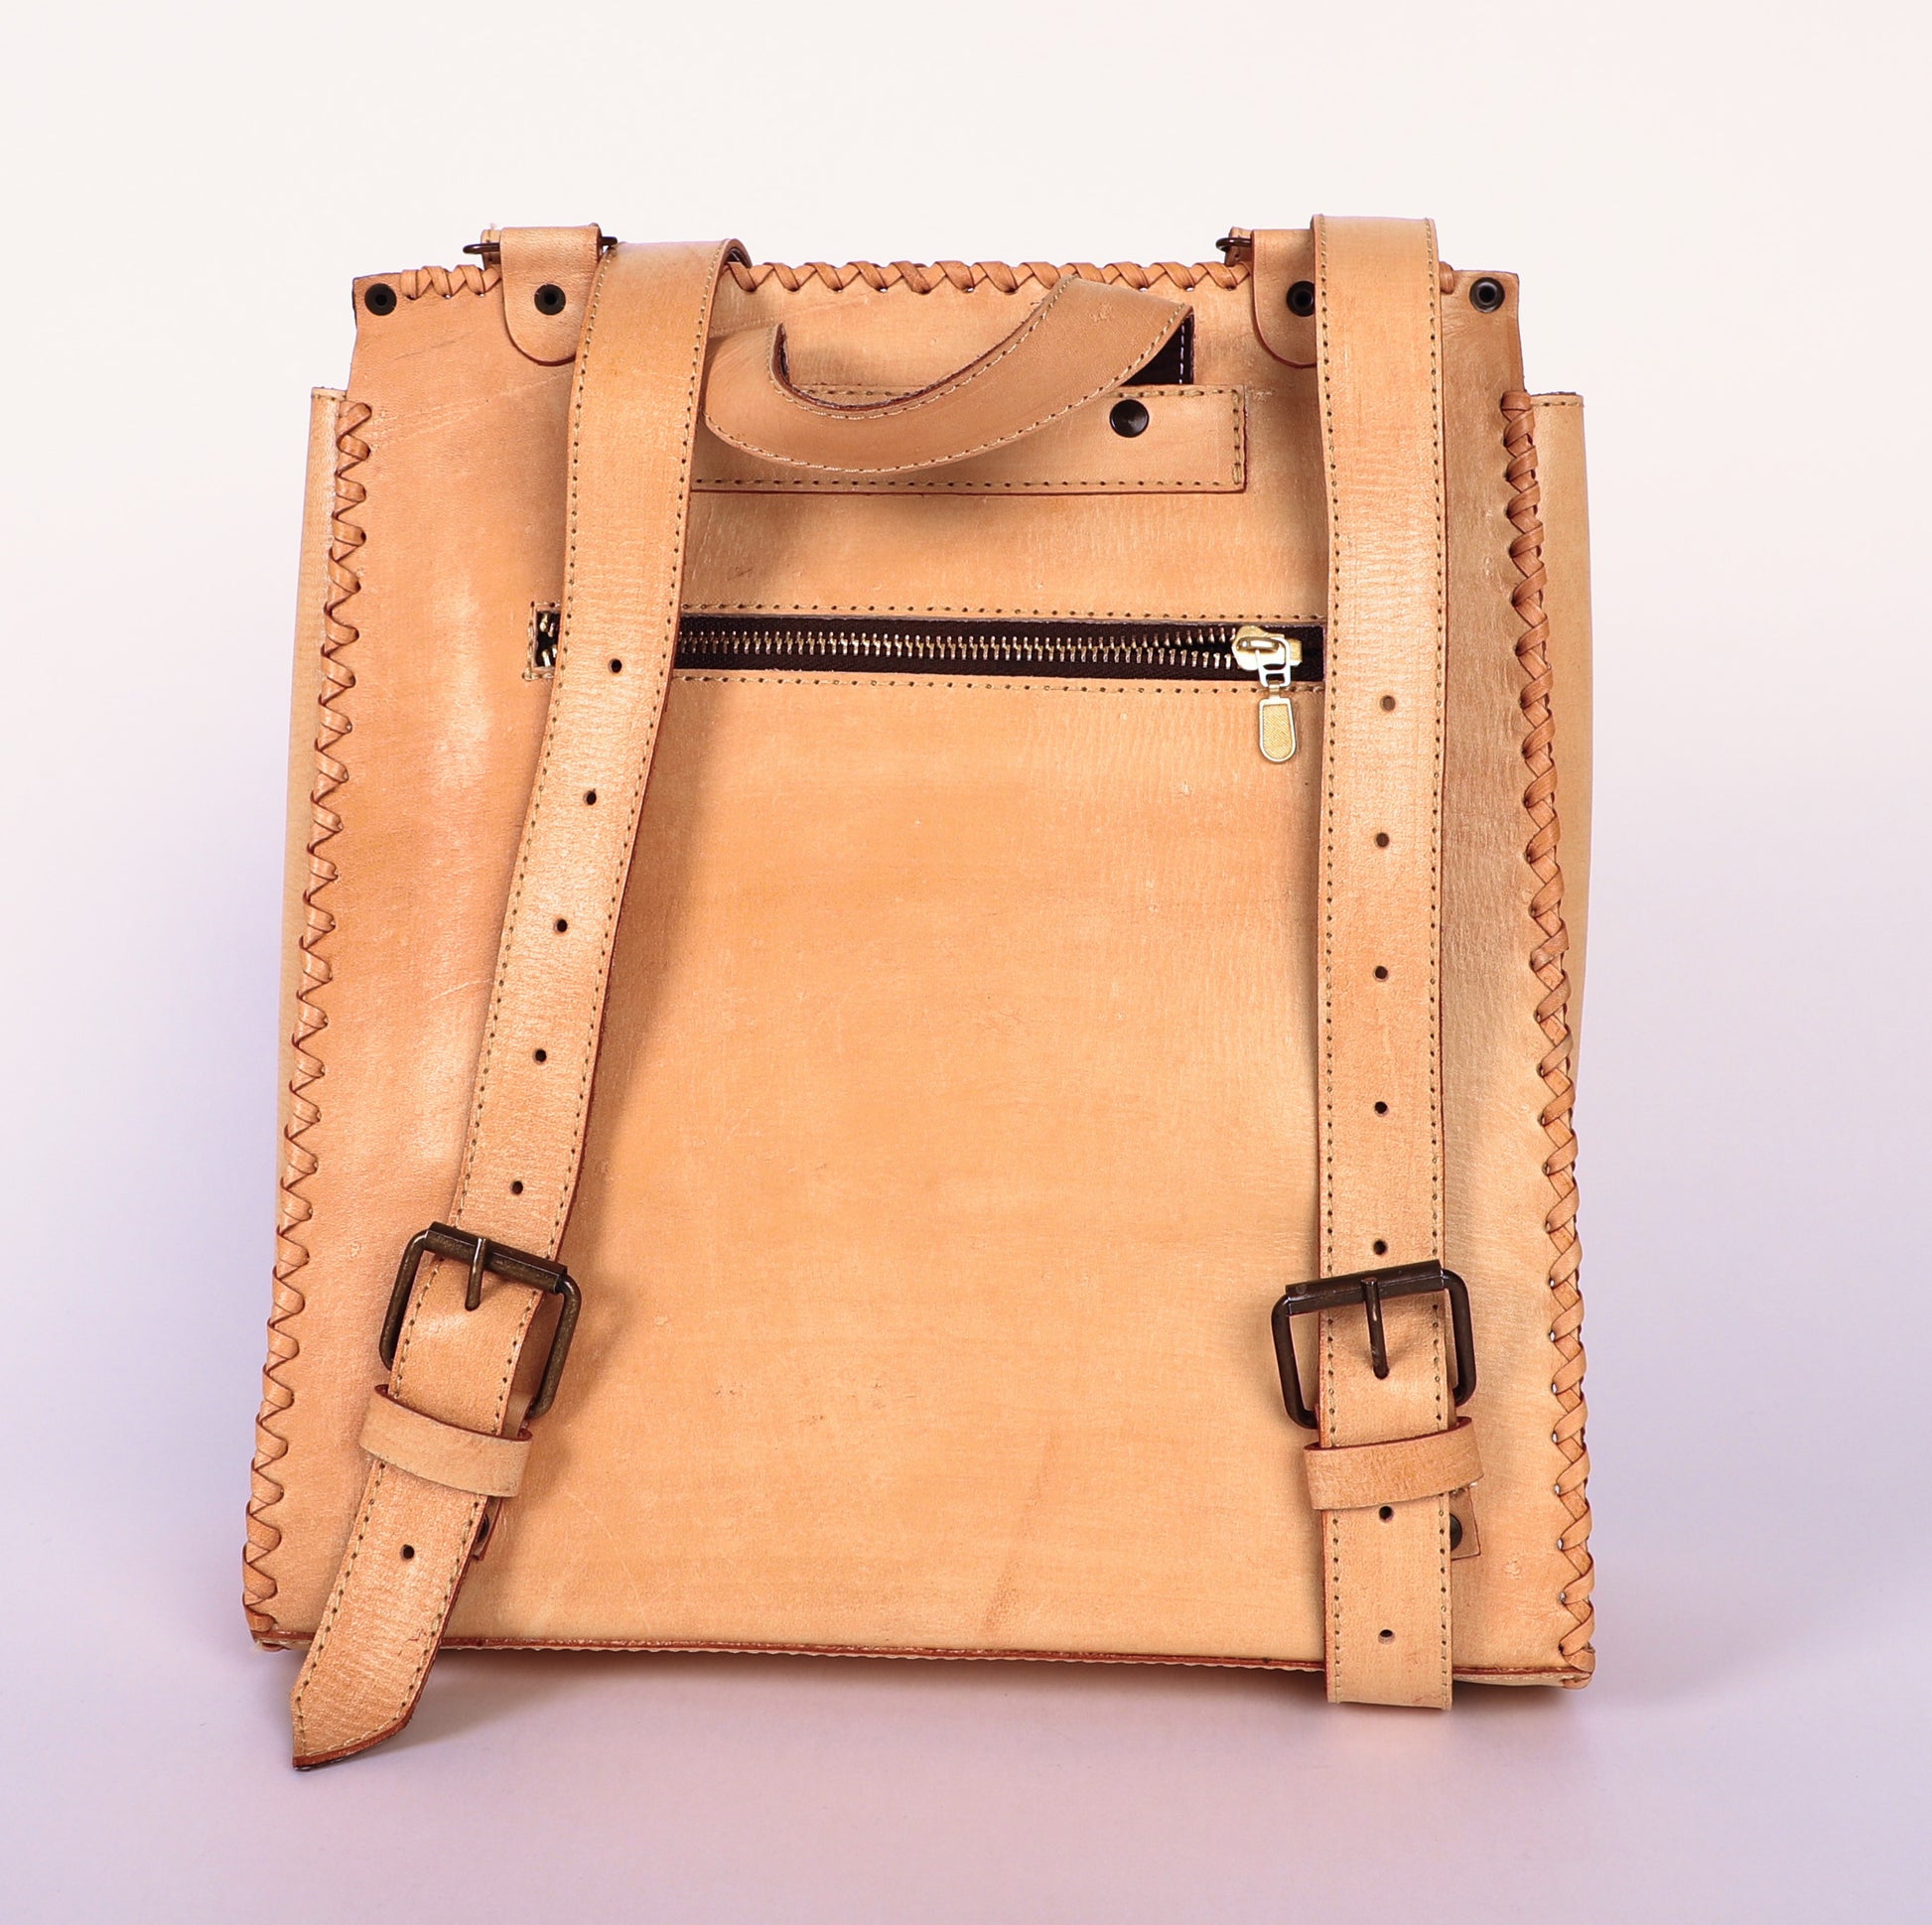 Traditional rectangle shaped Mexican backpack. Authentic leather in original nude color. Mexican Design etched only on  the top flap with buckle to close the flap.  Back view showing zipper pocket. Adjustable straps. 